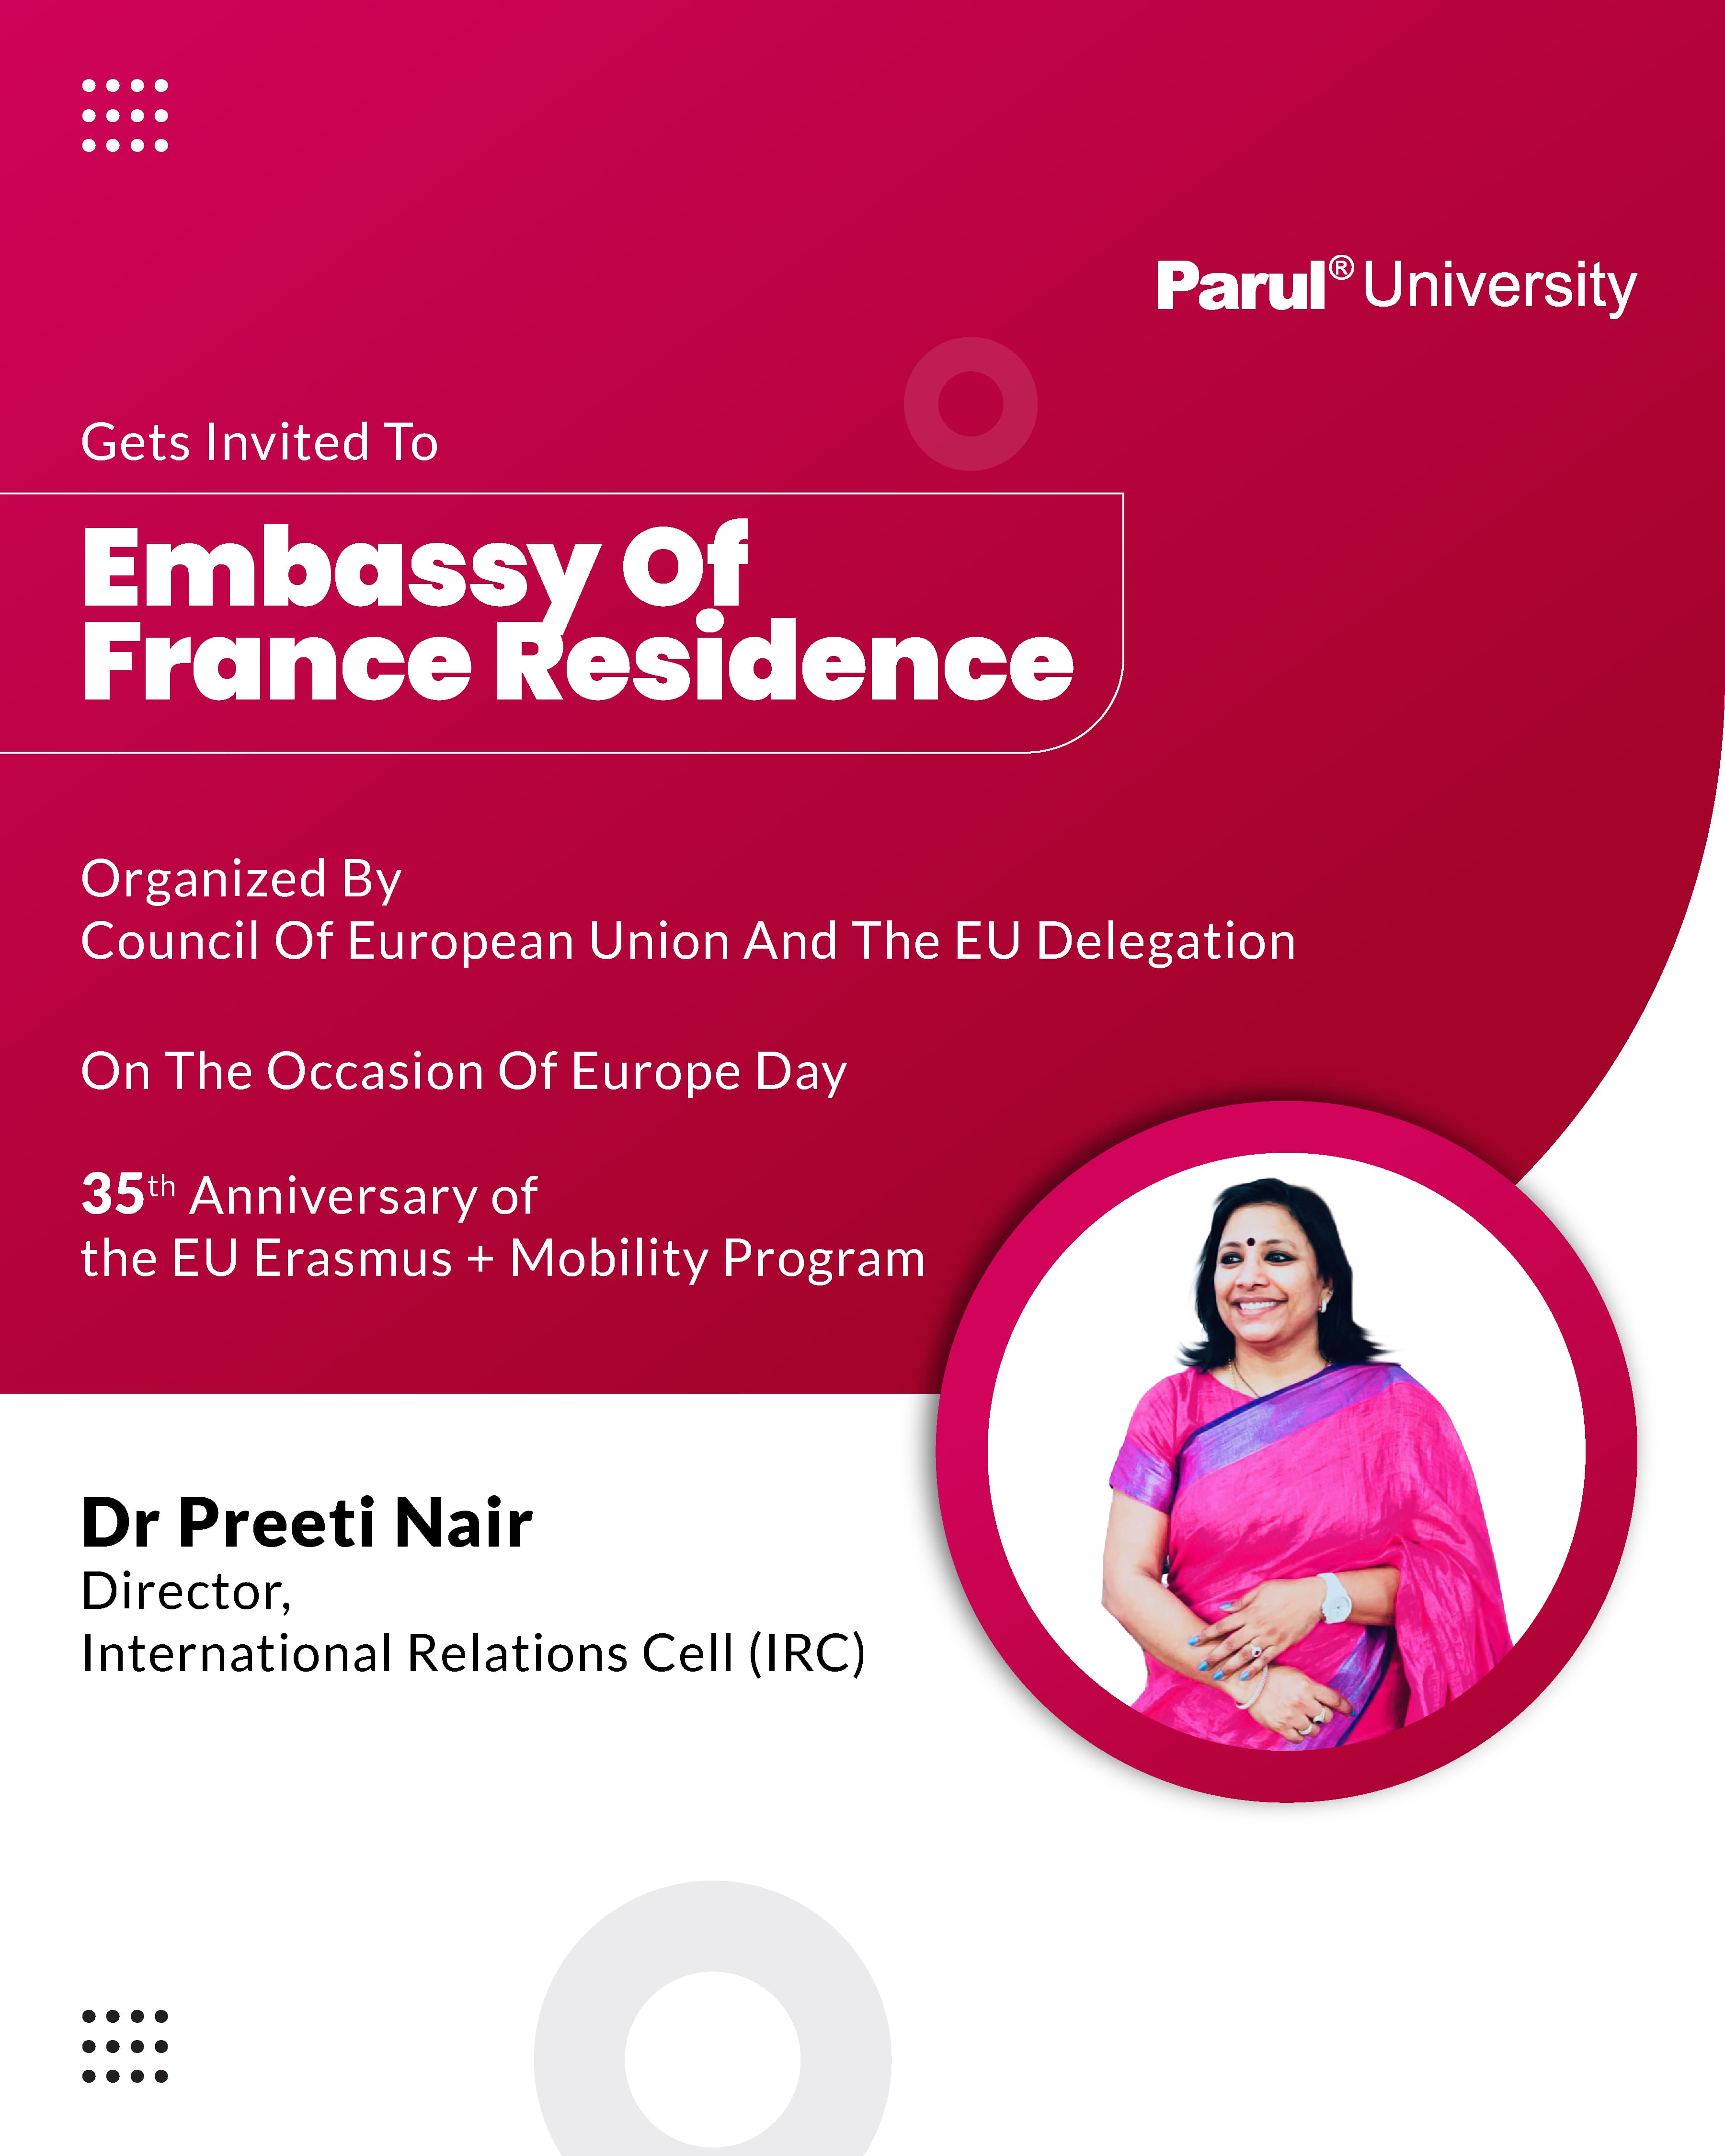 Dr. Preeti Nair gets Invited to Embassy of France Residence